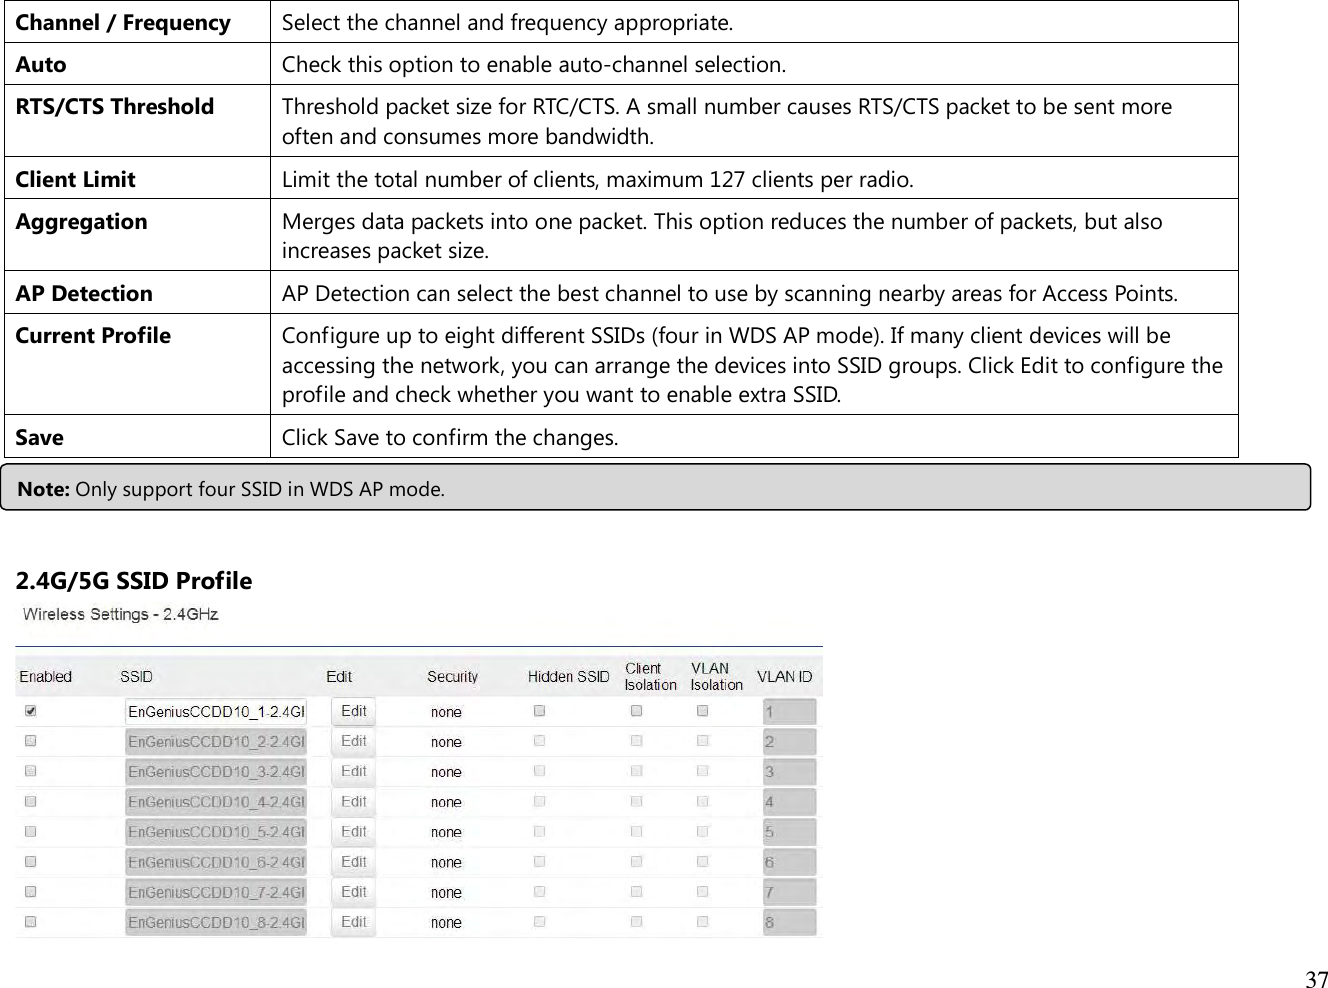  37  Channel / Frequency Select the channel and frequency appropriate. Auto Check this option to enable auto-channel selection. RTS/CTS Threshold Threshold packet size for RTC/CTS. A small number causes RTS/CTS packet to be sent more often and consumes more bandwidth. Client Limit Limit the total number of clients, maximum 127 clients per radio. Aggregation  Merges data packets into one packet. This option reduces the number of packets, but also increases packet size. AP Detection AP Detection can select the best channel to use by scanning nearby areas for Access Points. Current Profile Configure up to eight different SSIDs (four in WDS AP mode). If many client devices will be accessing the network, you can arrange the devices into SSID groups. Click Edit to configure the profile and check whether you want to enable extra SSID. Save Click Save to confirm the changes.    2.4G/5G SSID Profile Note: Only support four SSID in WDS AP mode. 